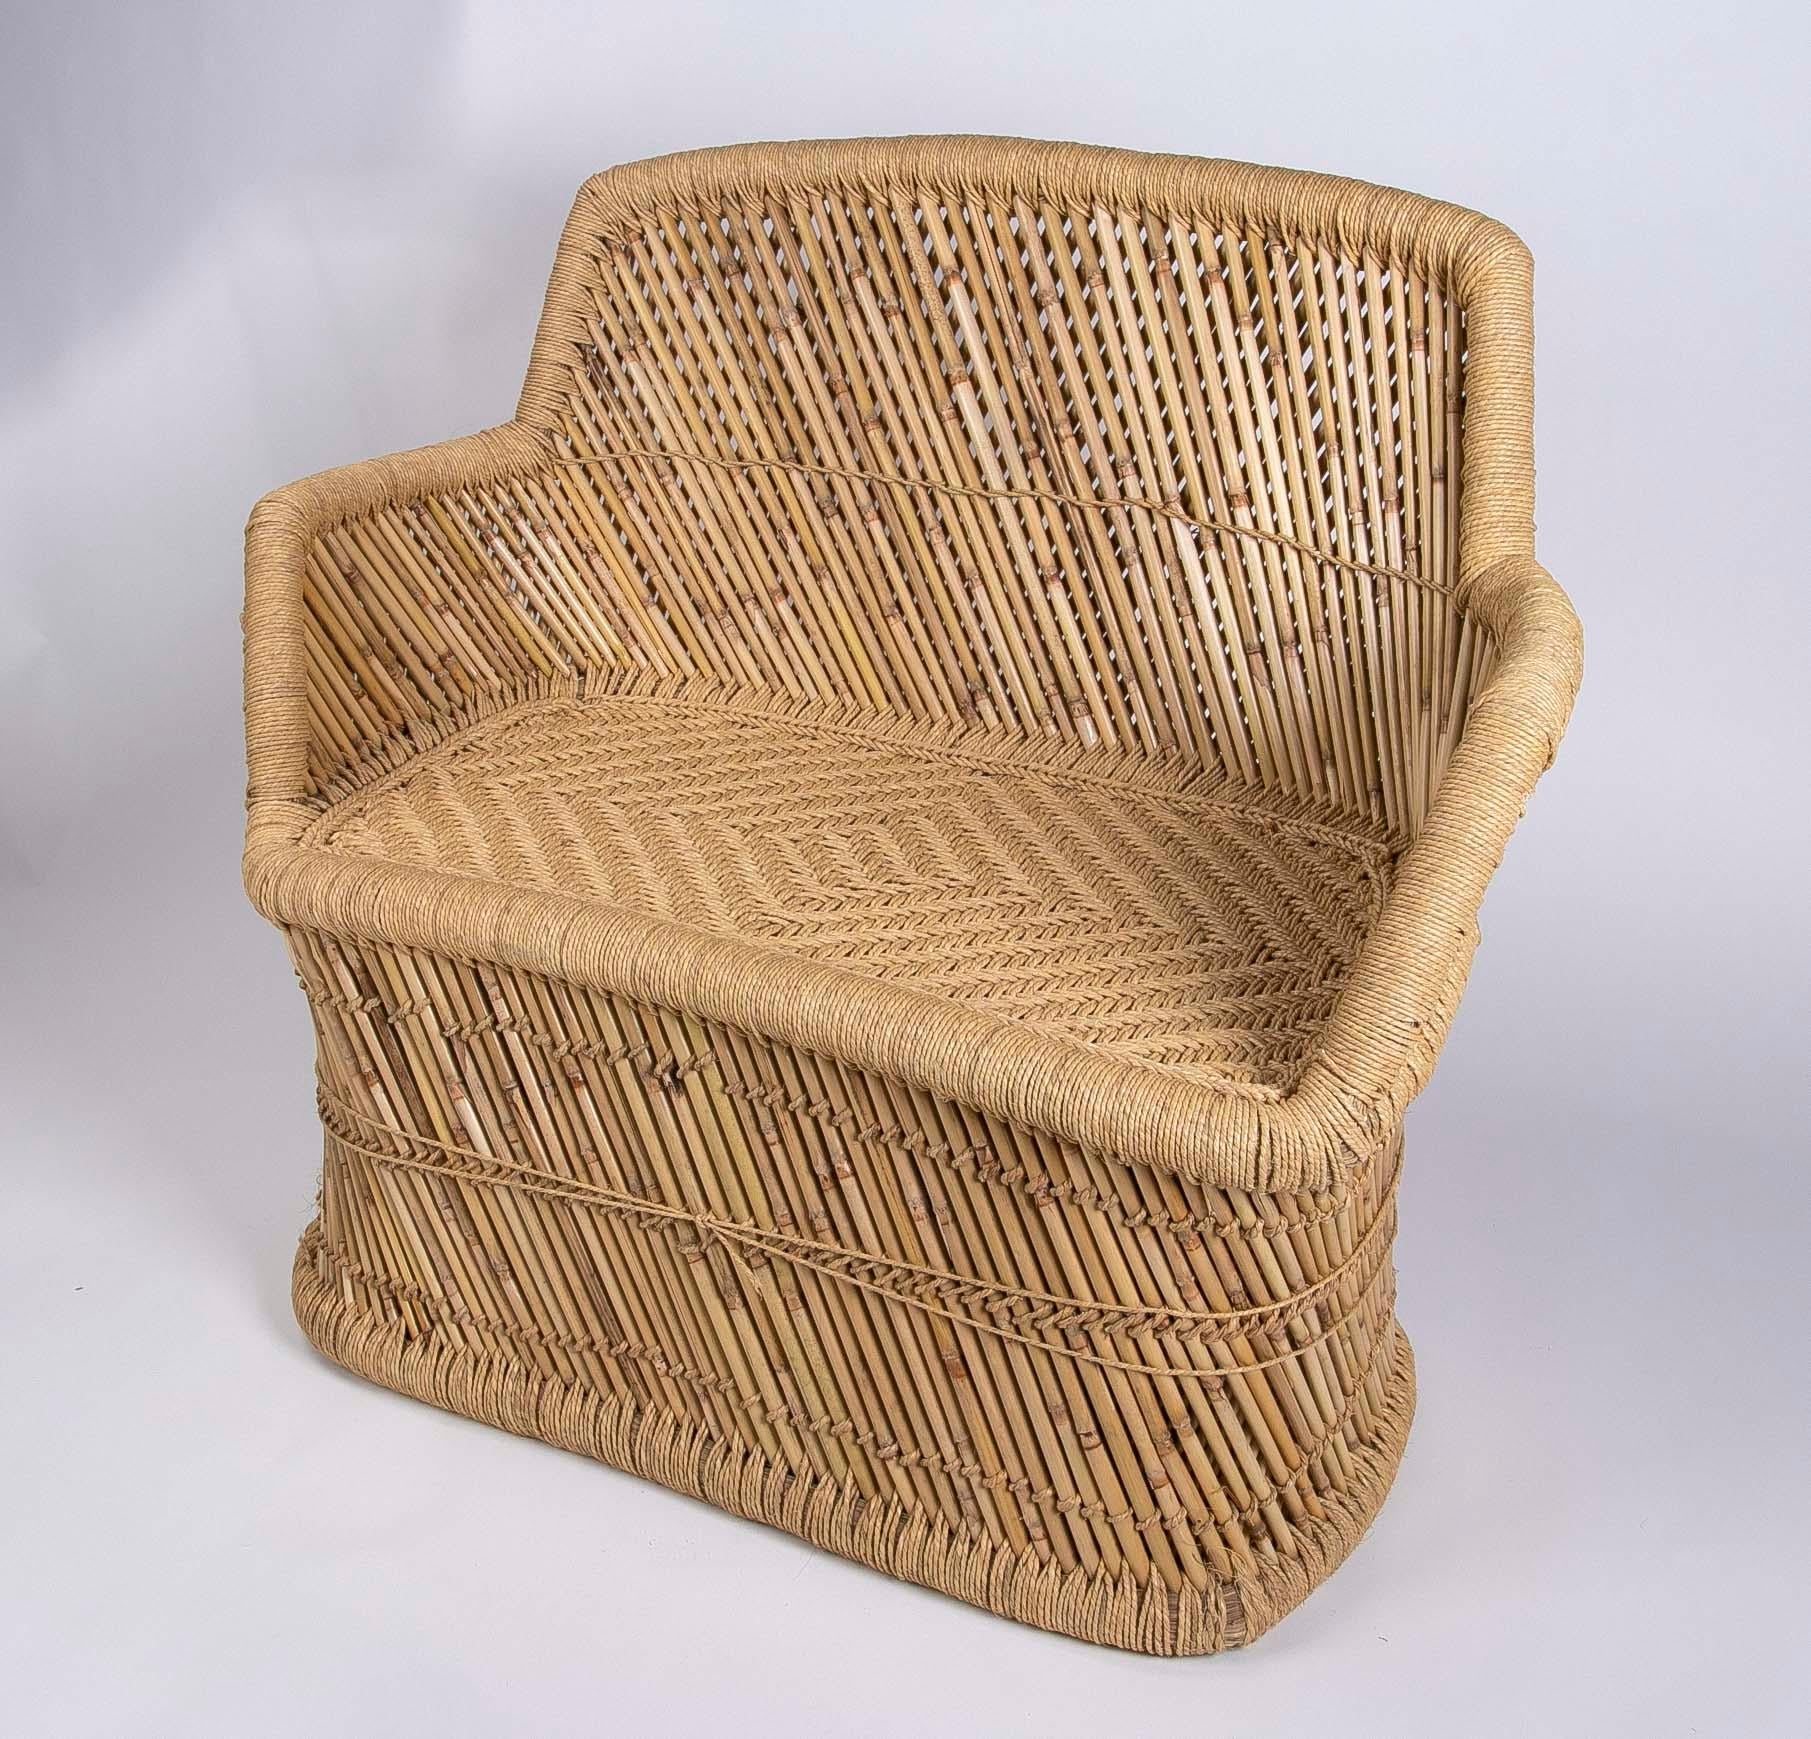  Bamboo and Rope Hand-Stiched  Sofa For Sale 7